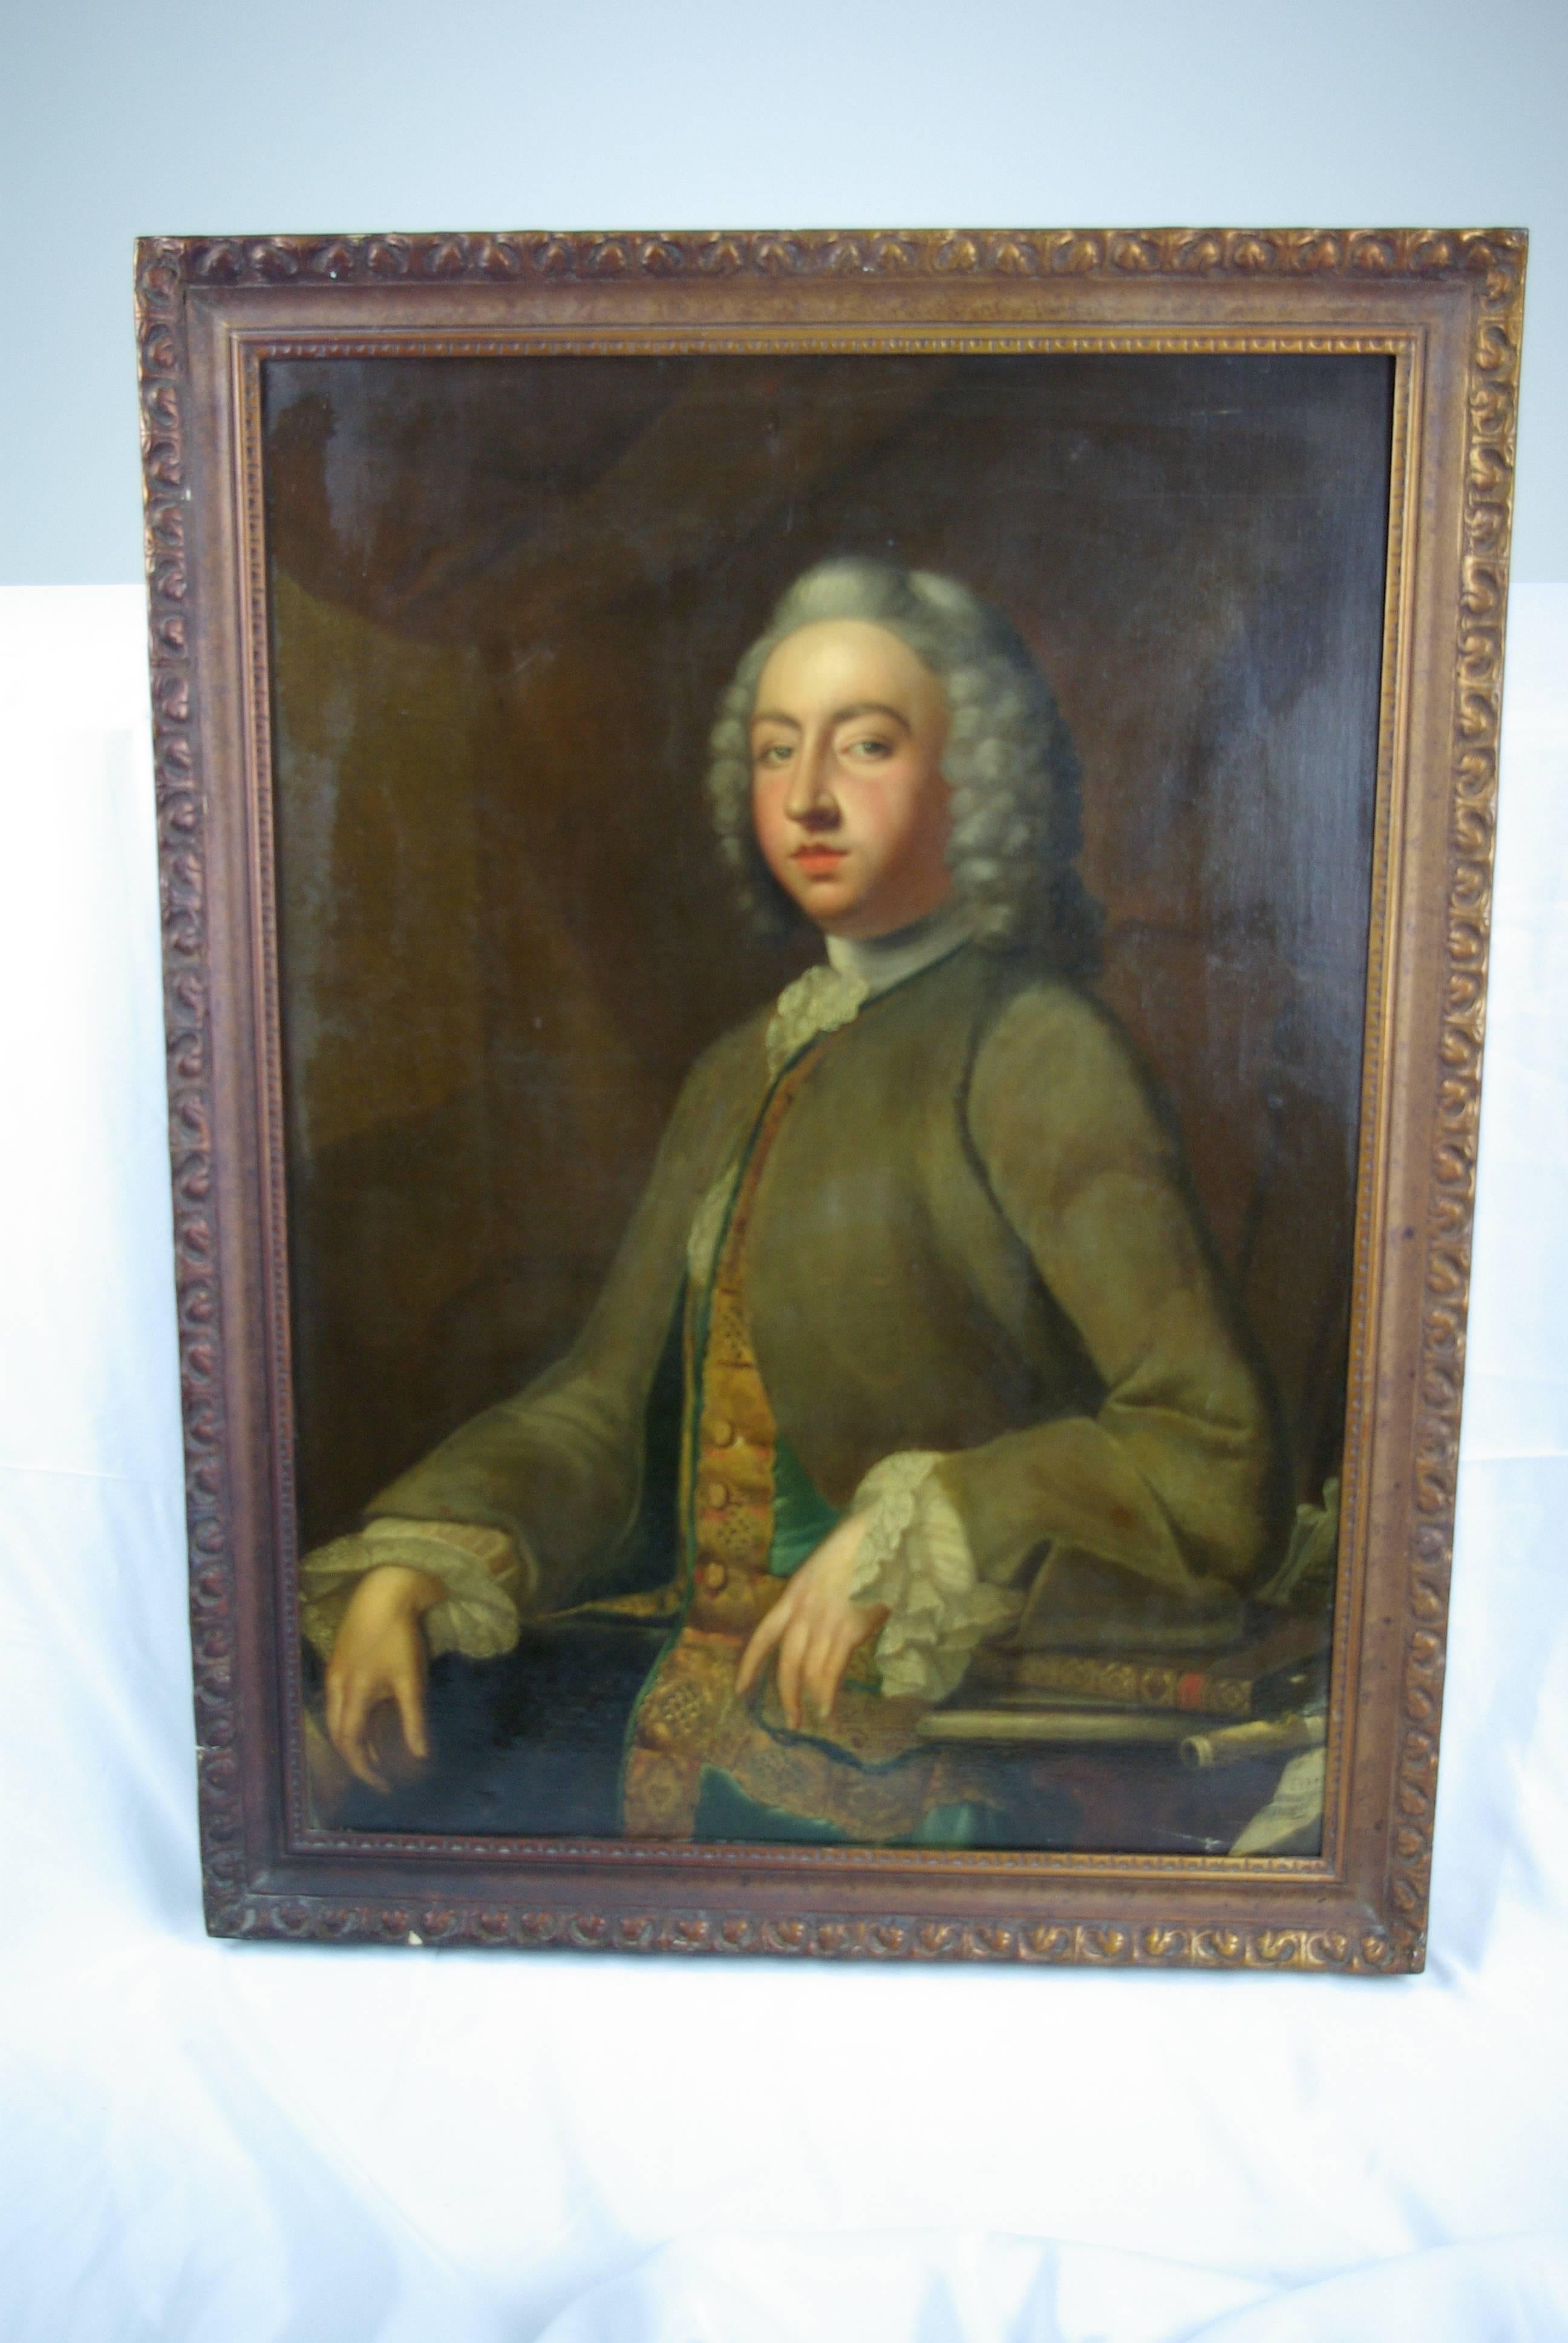 Hand-Painted 18th Century English Portrait of a Gentleman, Oil on Canvas, Unsigned